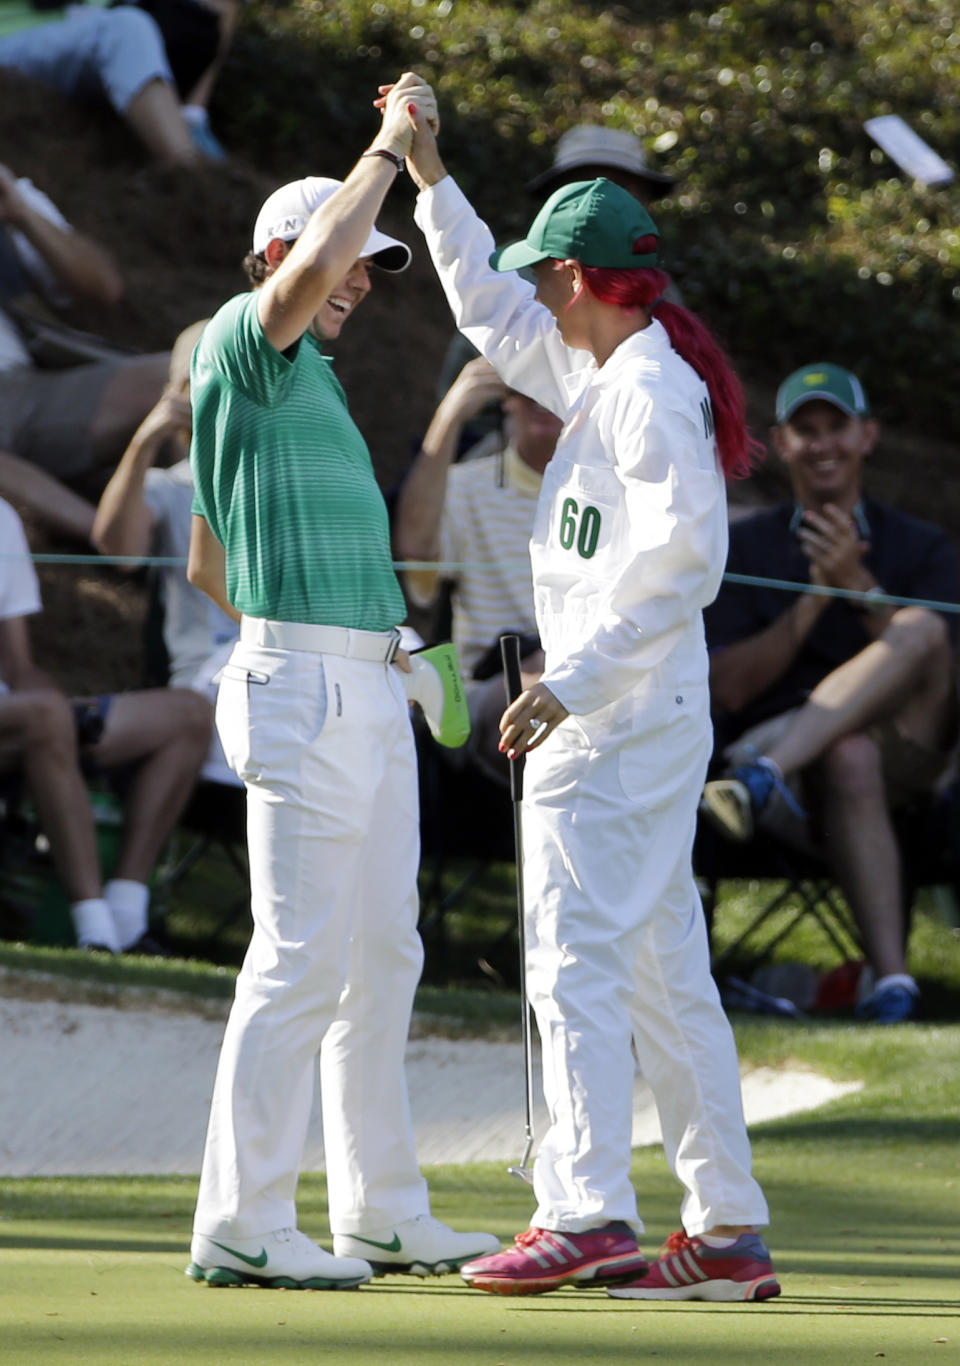 Tennis player Caroline Wozniacki high fives with her fiancee Rory McIlroy, of Northern Ireland, after Wozniacki putted on the ninth hole during the par three competition at the Masters golf tournament Wednesday, April 9, 2014, in Augusta, Ga. (AP Photo/David J. Phillip)